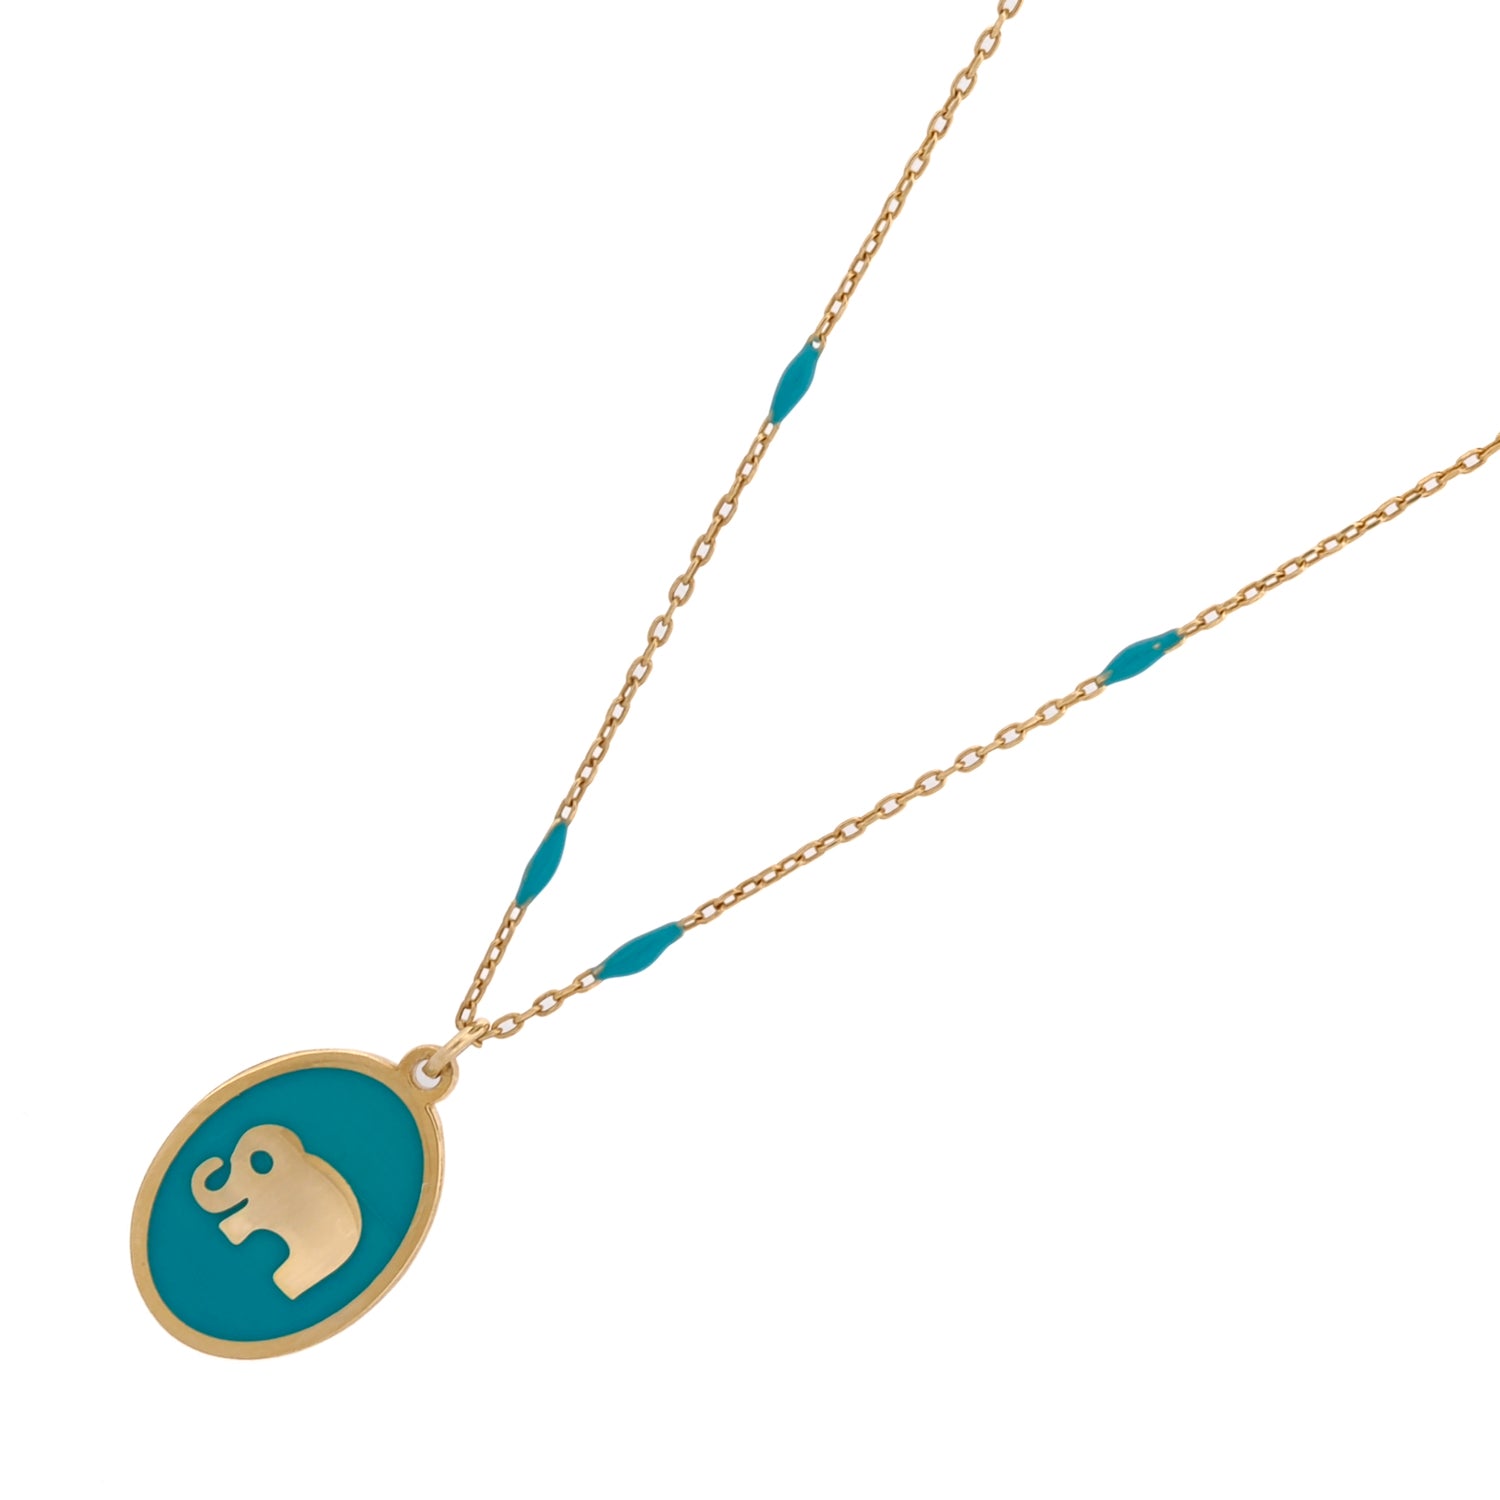 Luxurious Turquoise and Gold Elephant Pendant Necklace